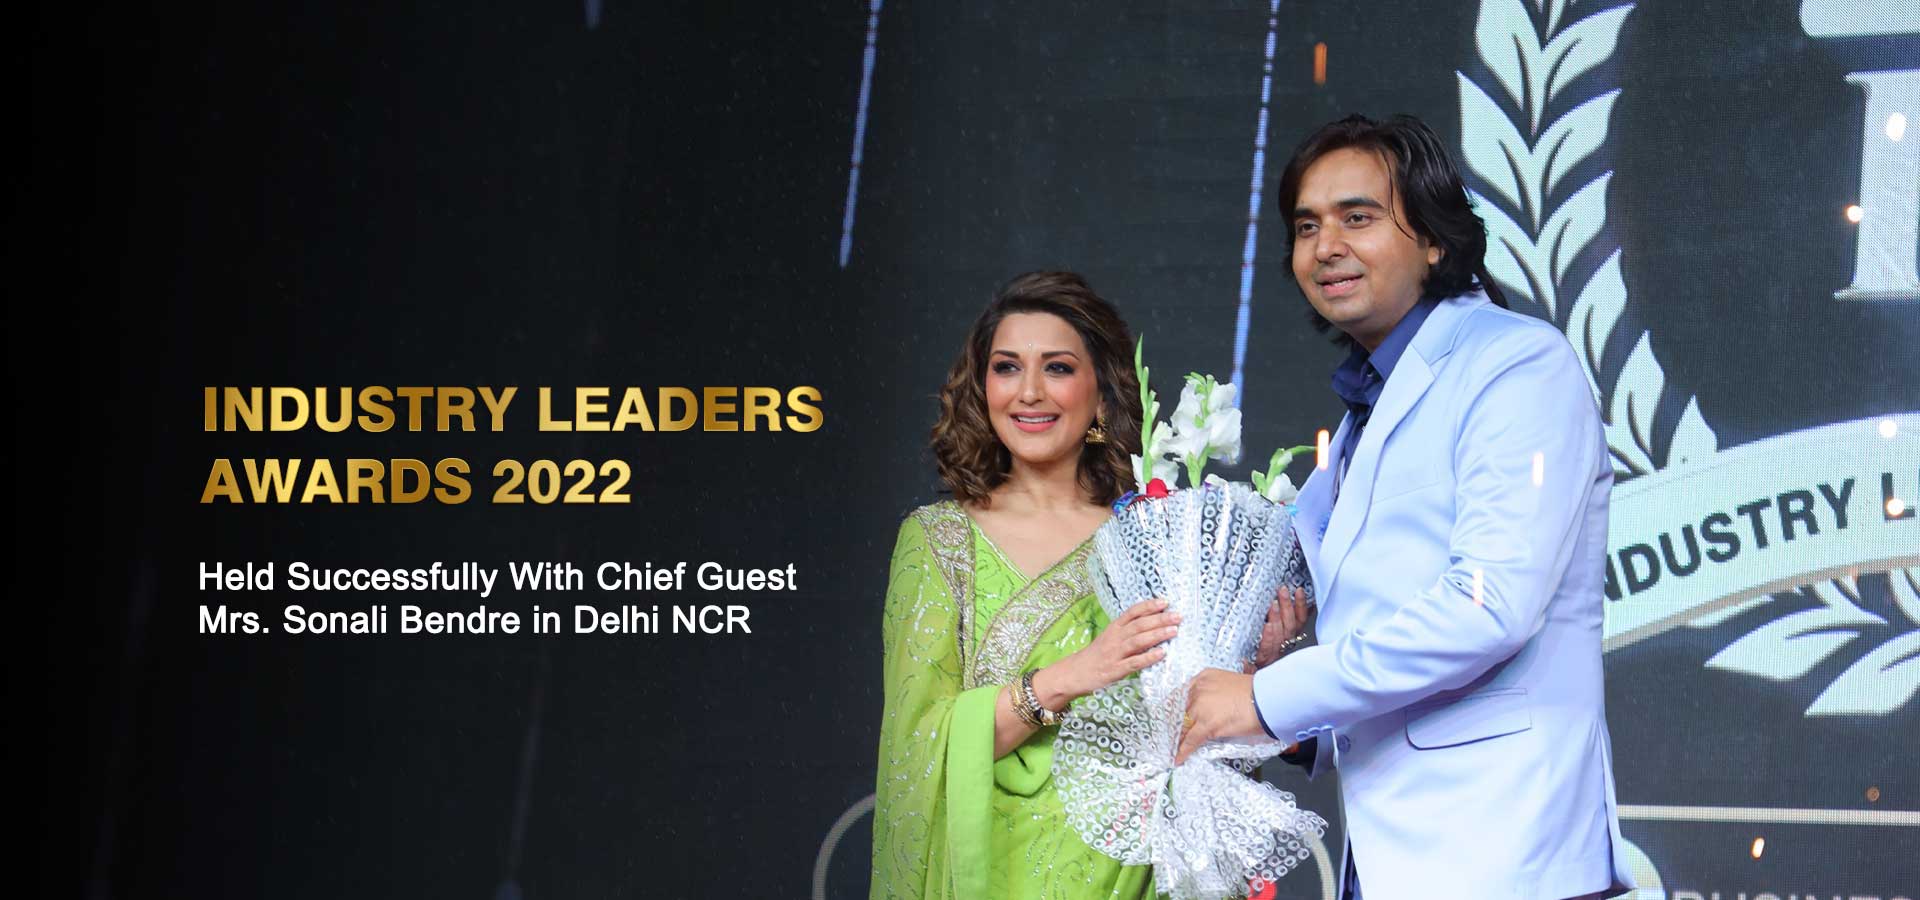 Industry Leaders Awards 2022 Completed Successfully